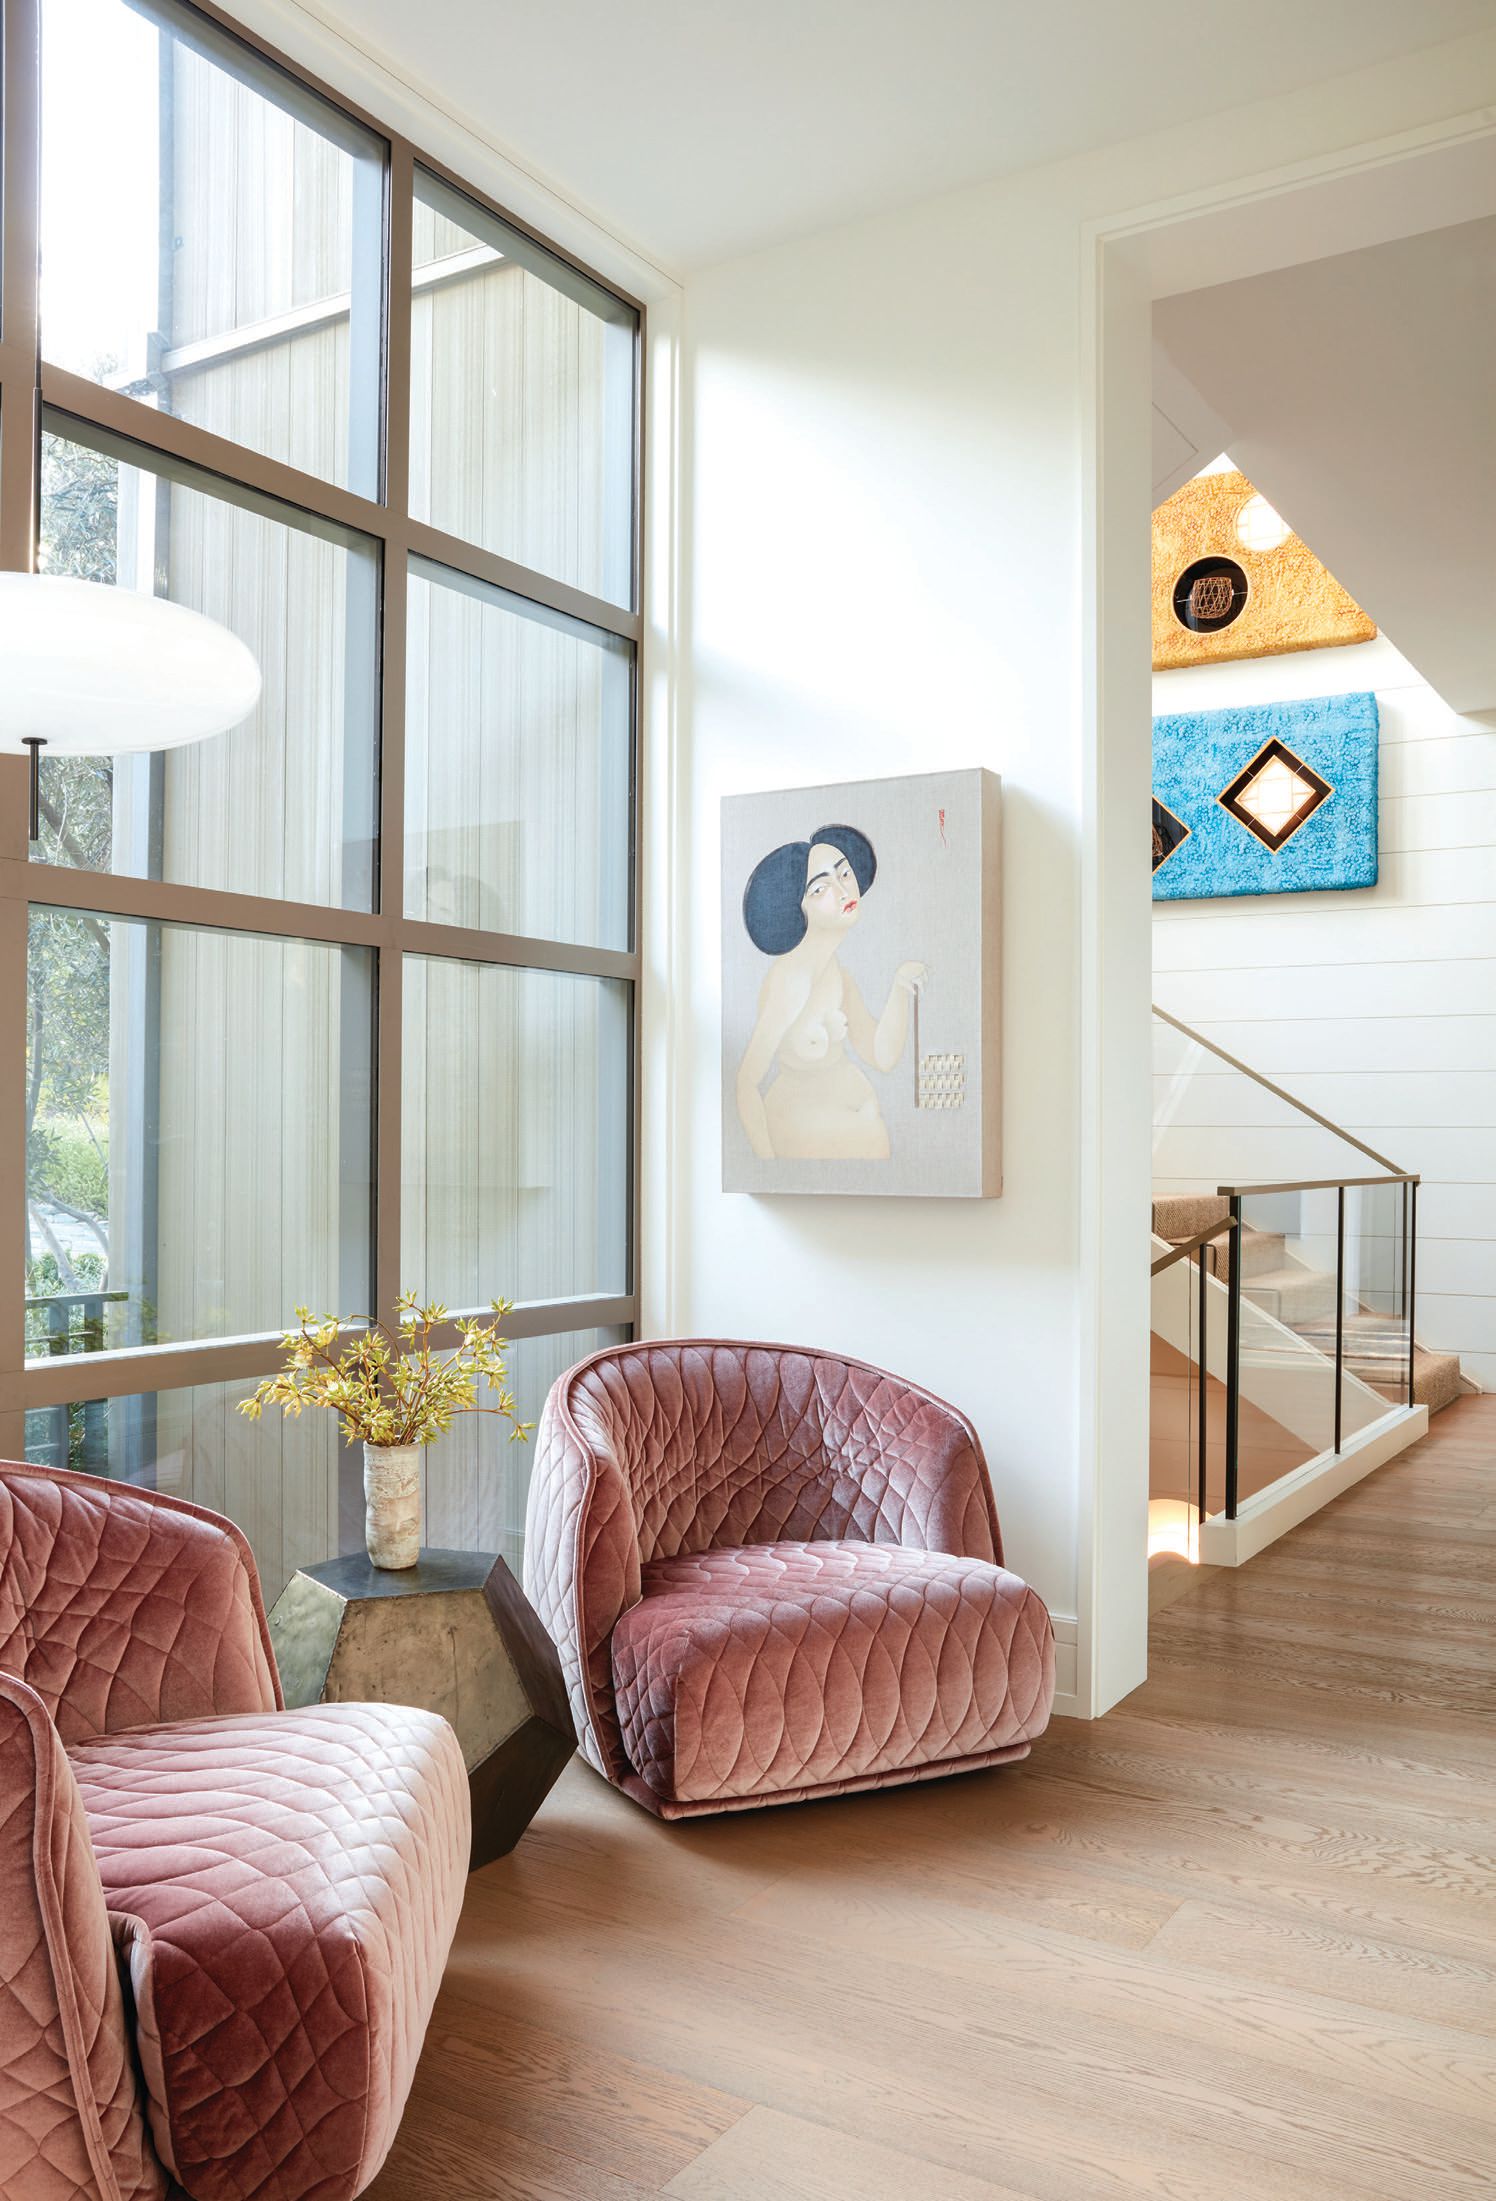 The home boasts an extensive modern art collection PHOTOGRAPHED BY ROGER DAVIES